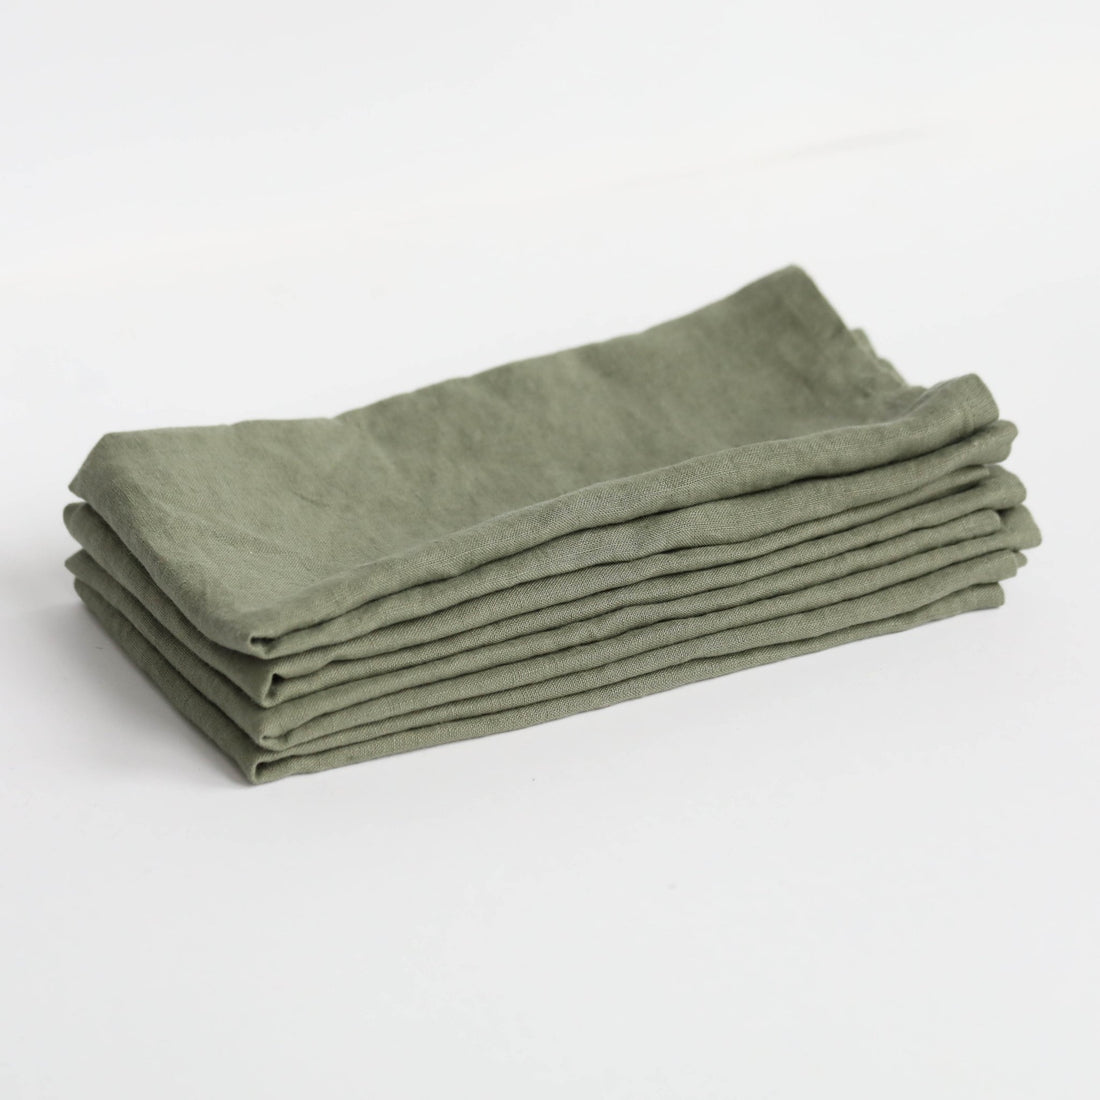 Olea French Linen Napkin Set of 4 - Green and Brass